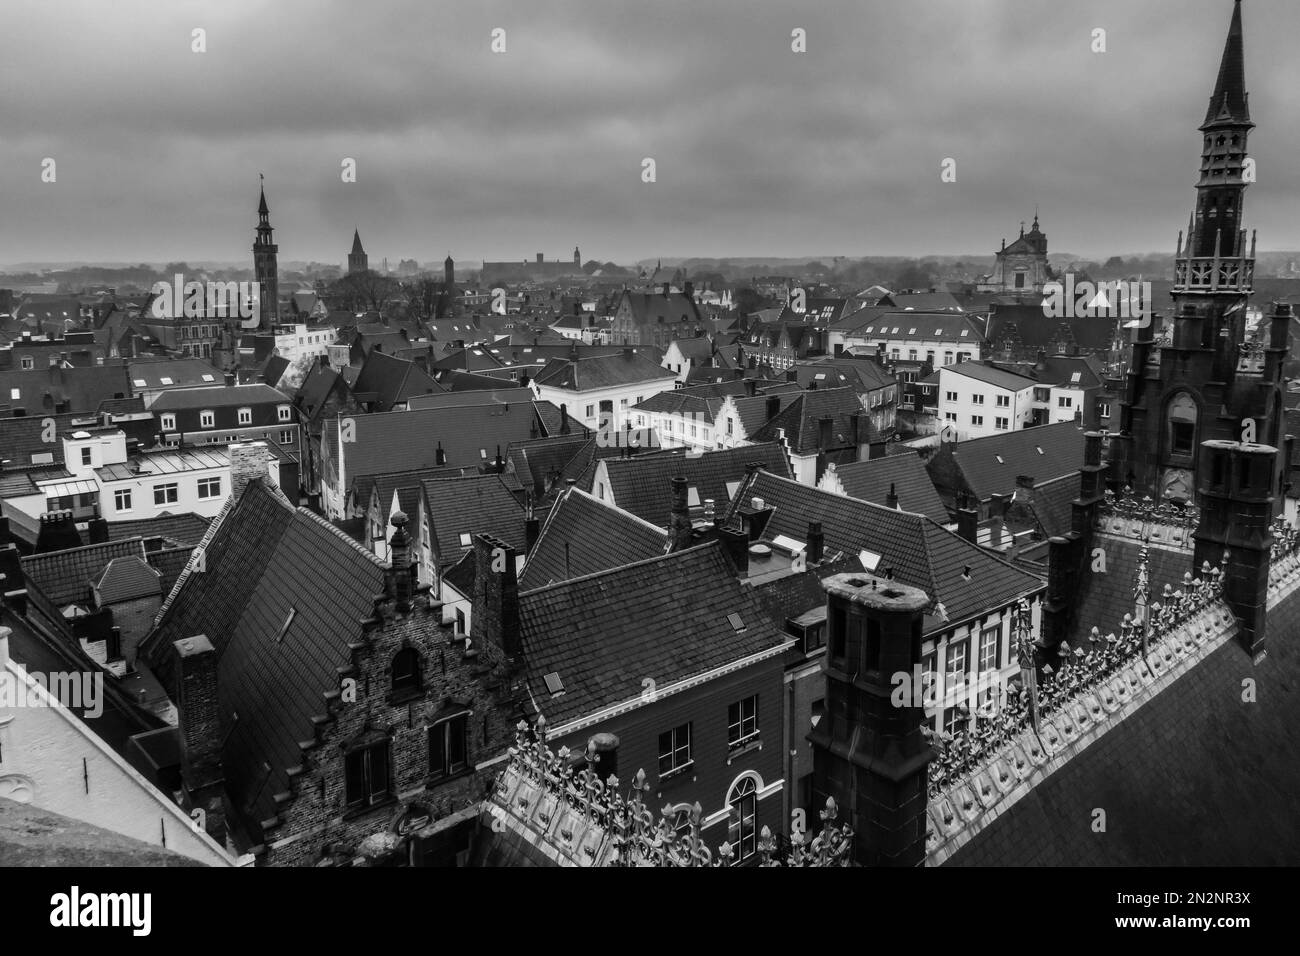 Sightseeing over the red clay tiled roofs of Bruges Belgium Europe. November 2022 Stock Photo